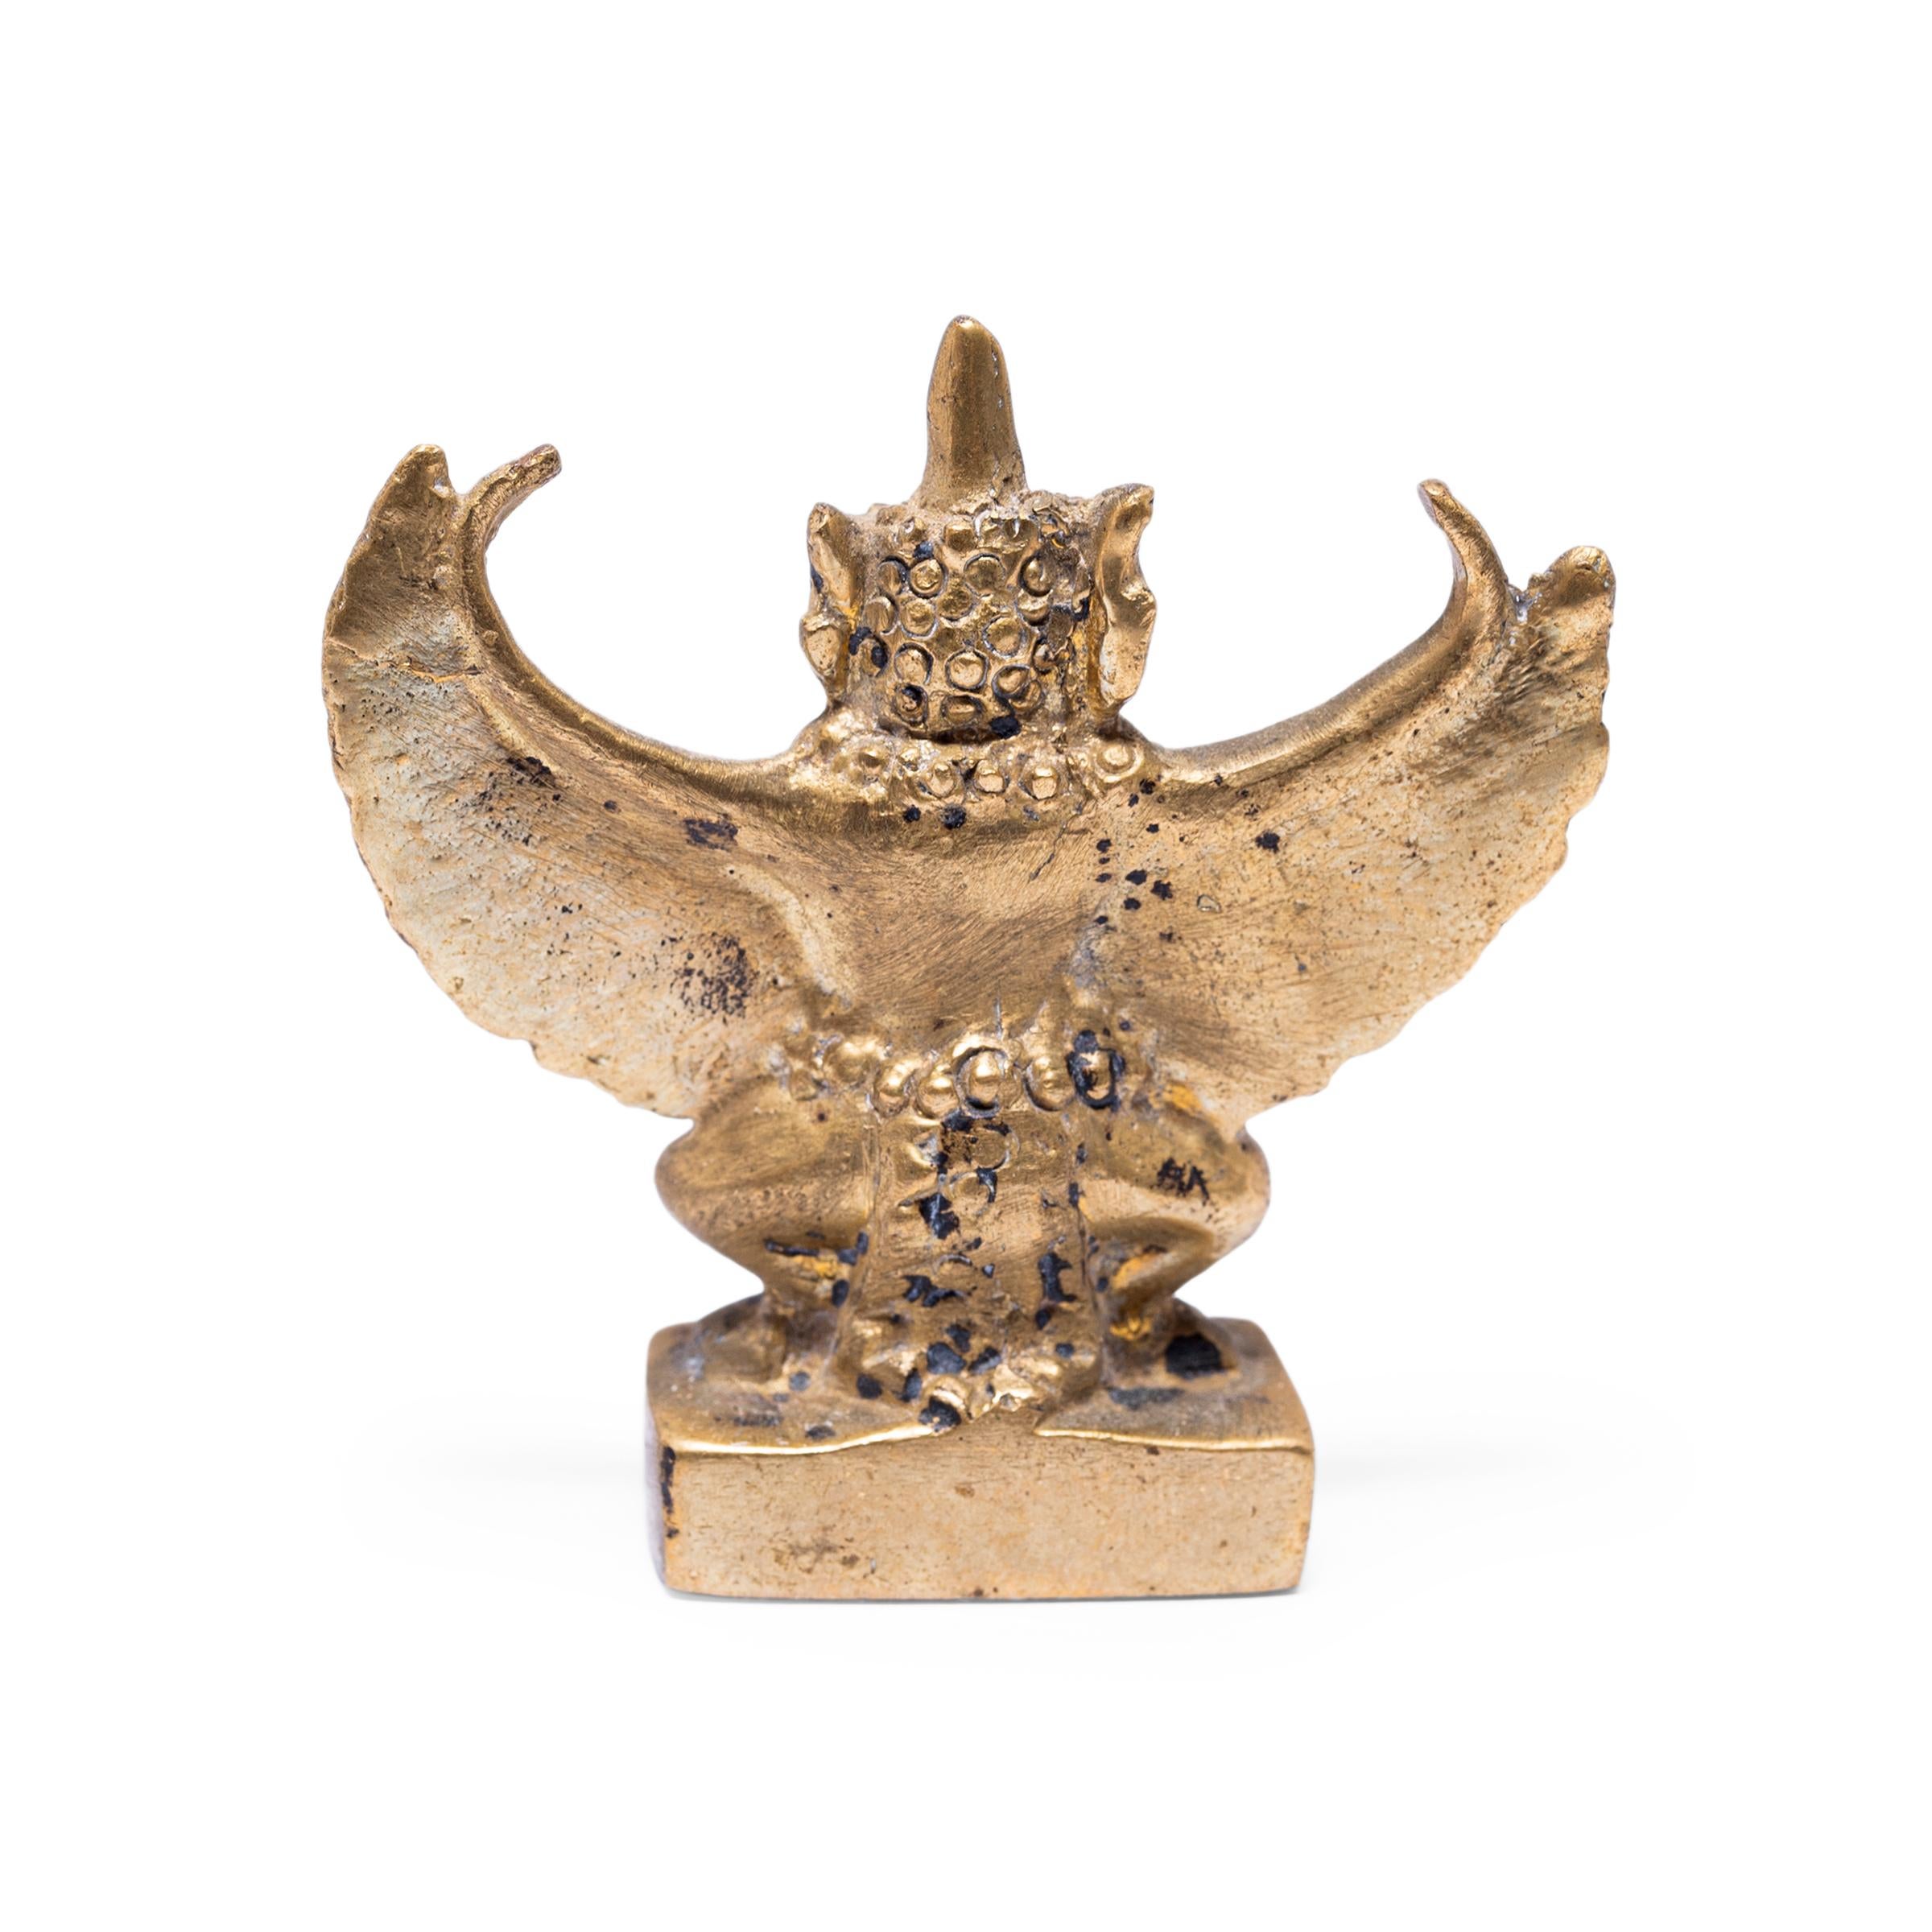 This petite bronze figurine is cast in the form of Garuda, a demigod and mythical king of birds in Hindu and Buddhist faith. Taking the form of half-bird half man, Garuda is a powerful protector and ever-watchful enemy of the serpent. Garuda is